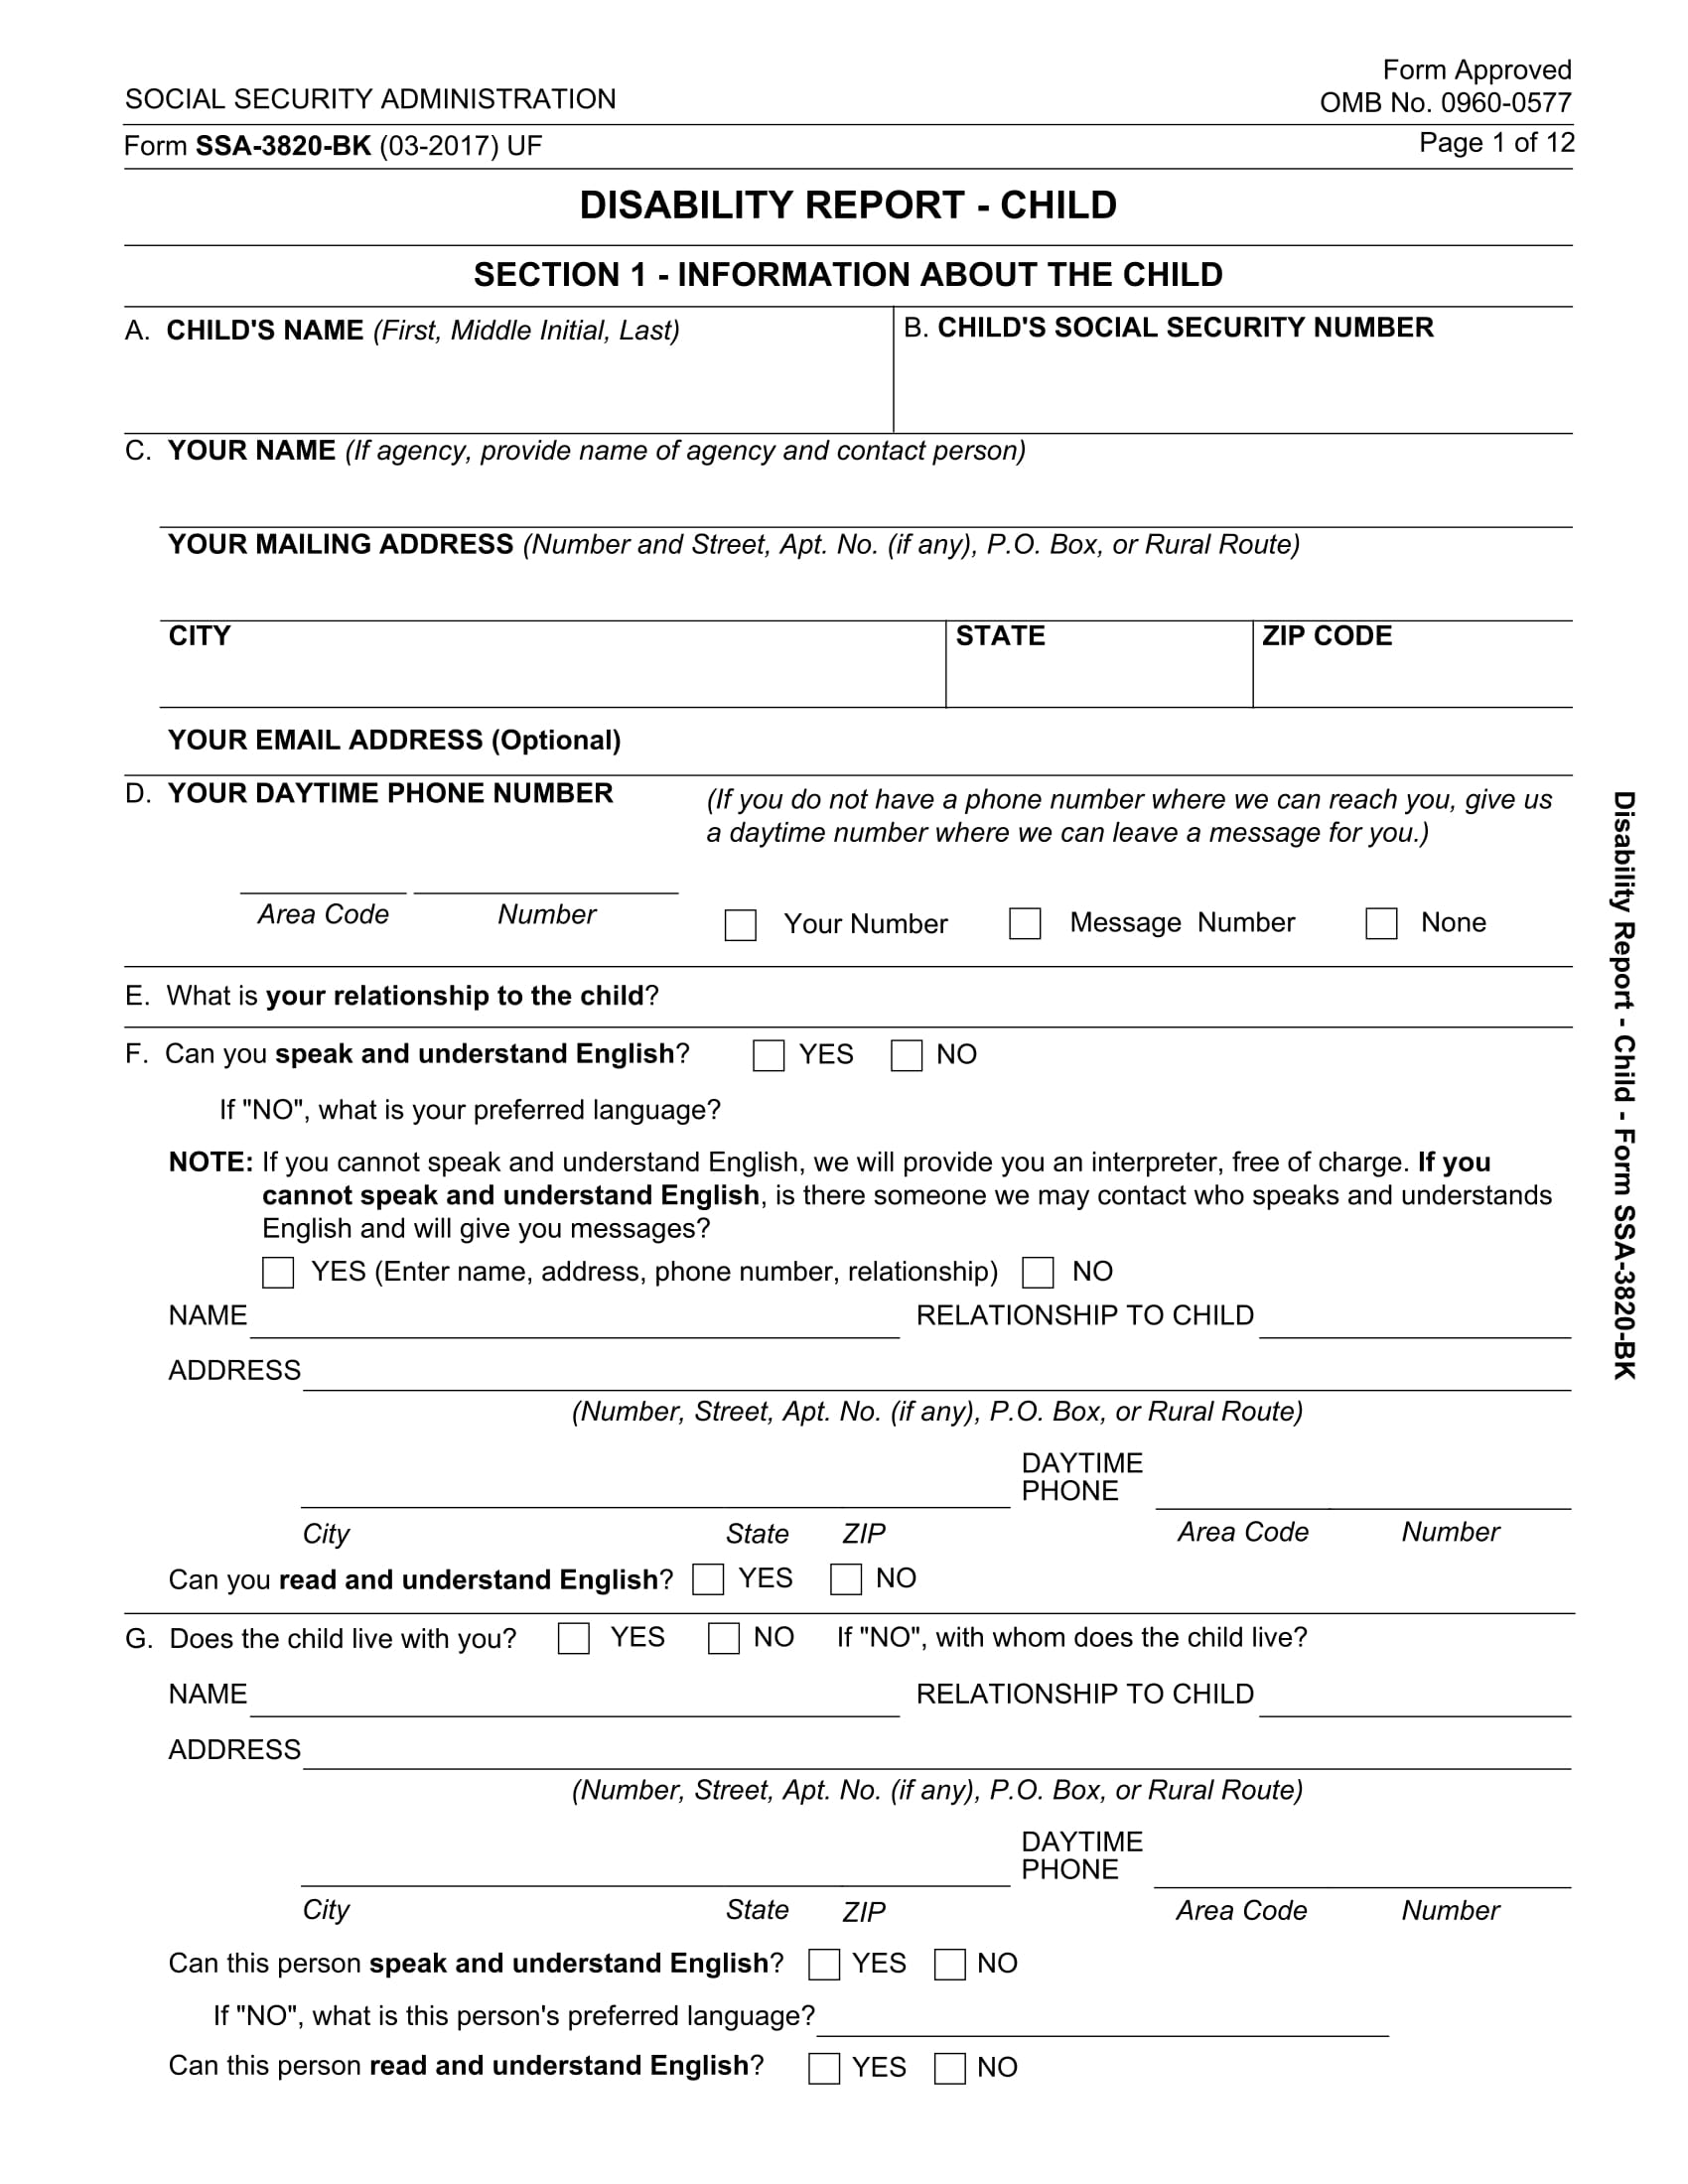 child disability report form 03